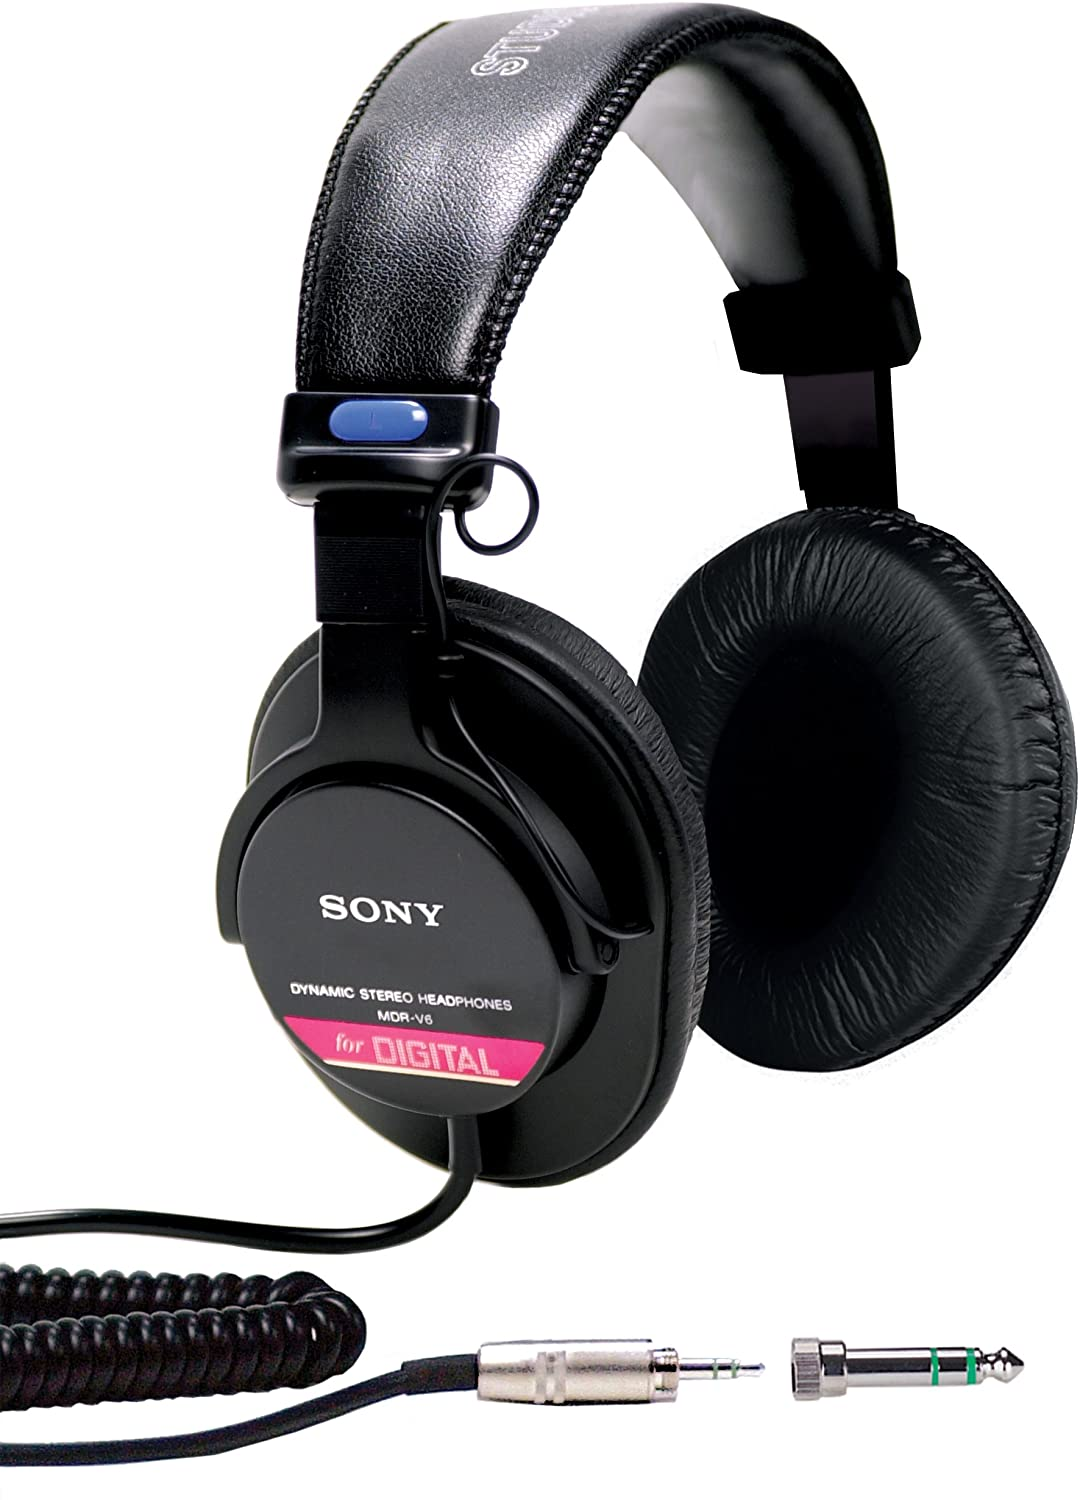 Sony MDR-V6: Accurate studio monitoring headphones